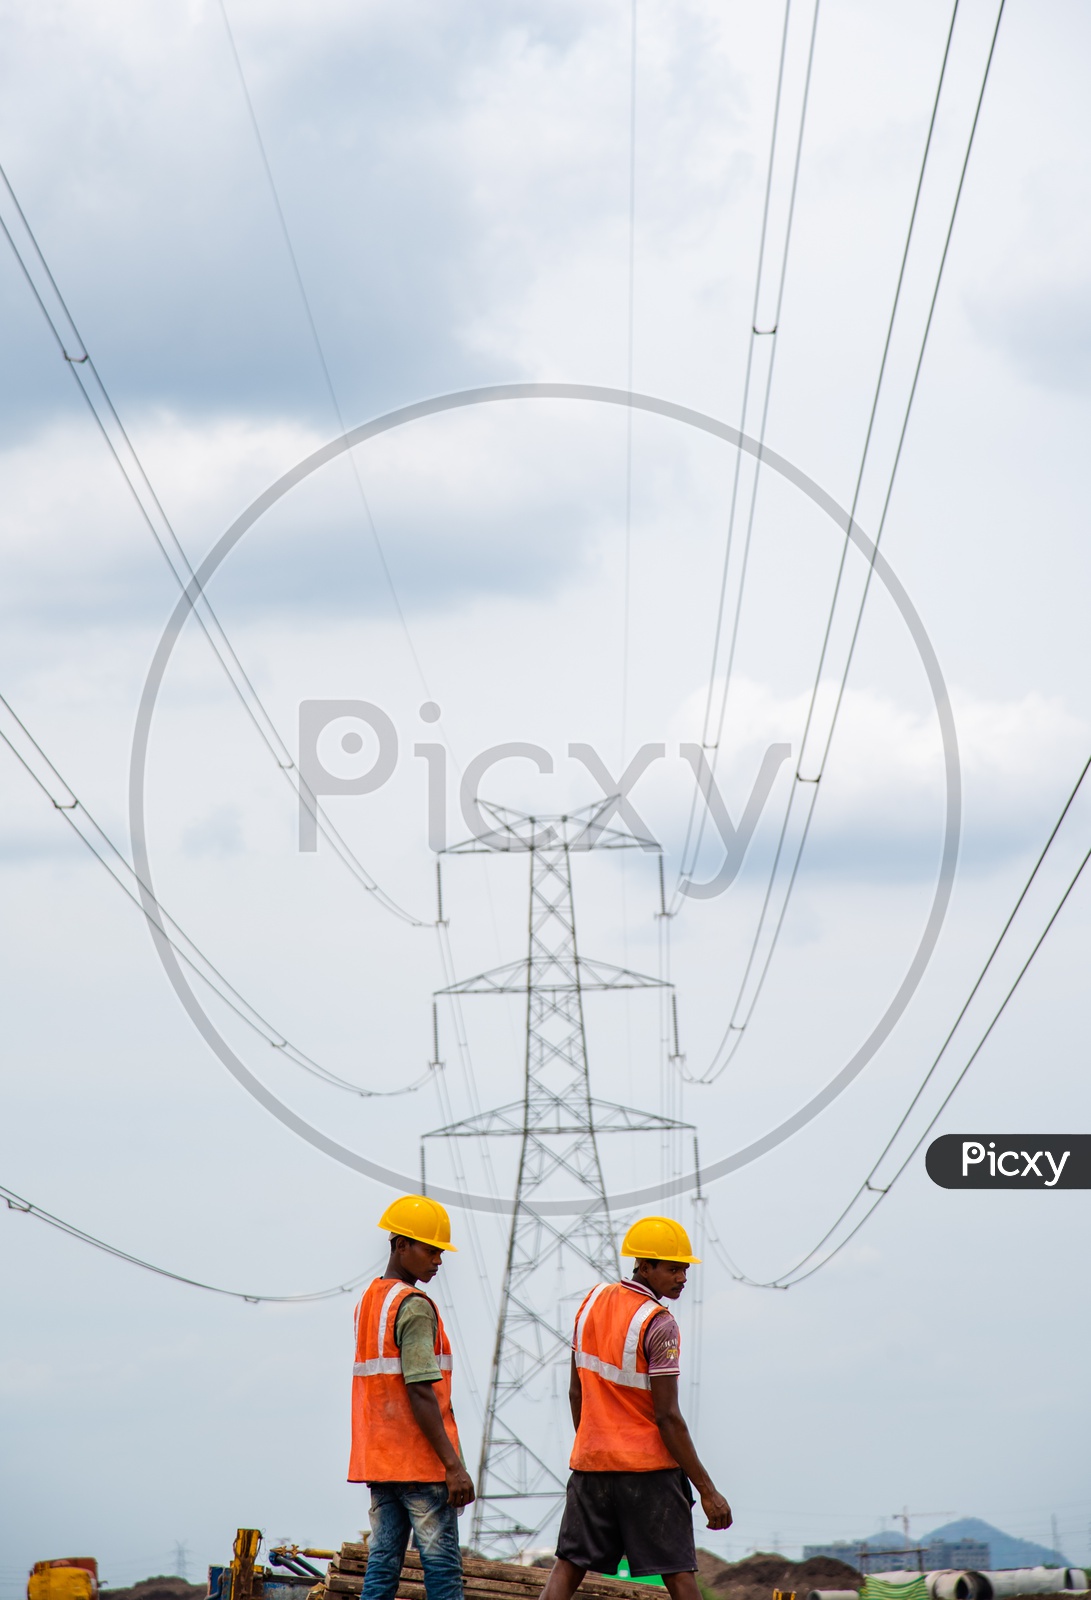 Construction Workers under High Voltage Electricity Wires.